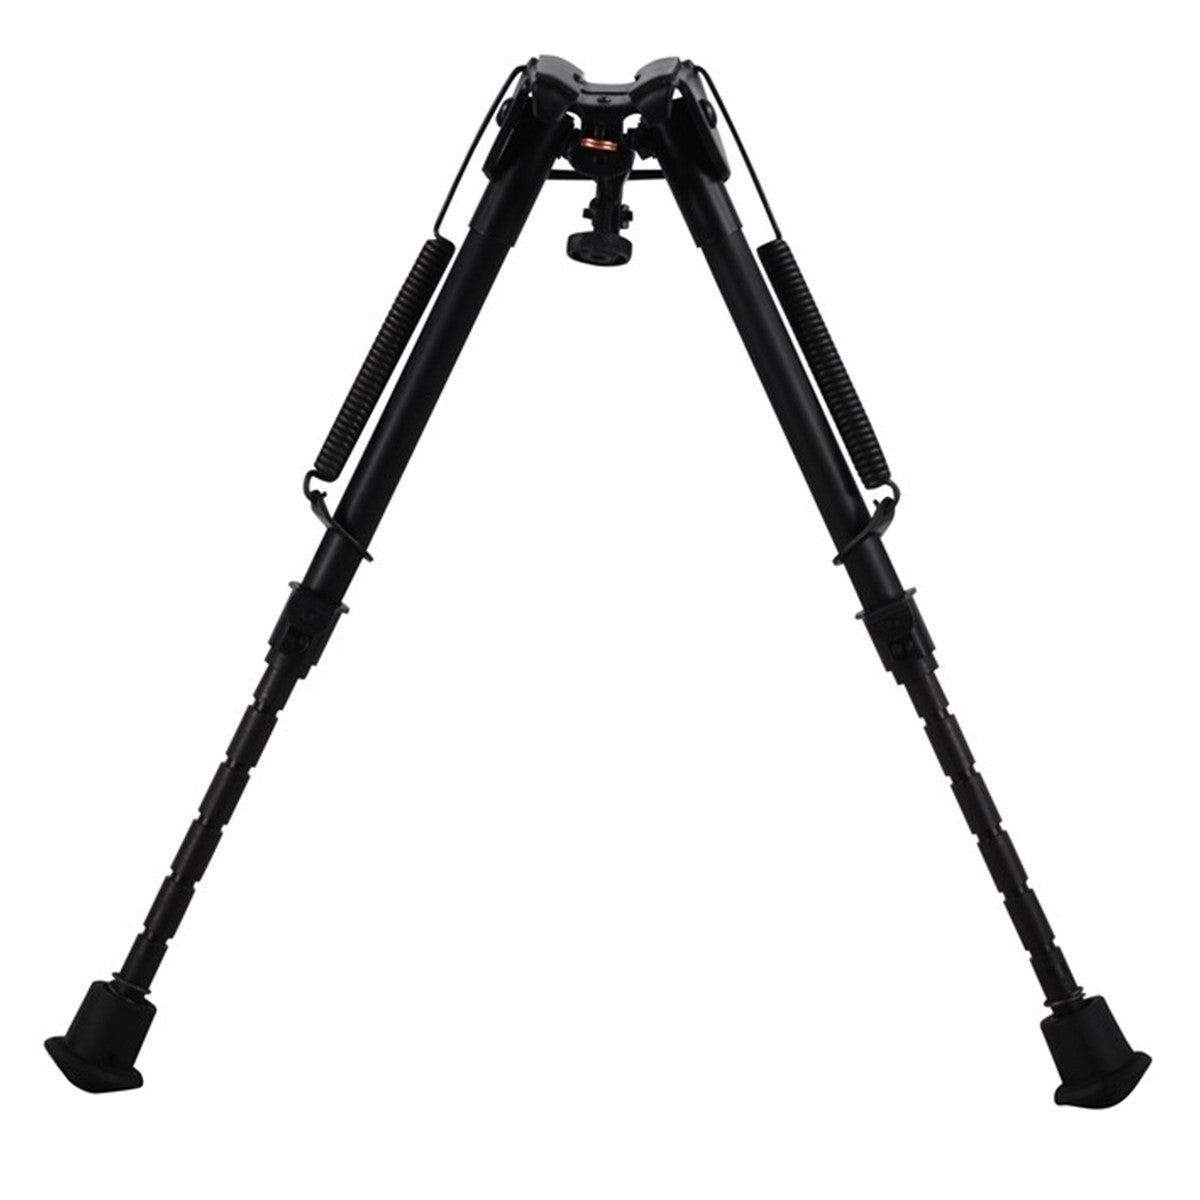 Harris 1A2-LM 9 to 13 Inch Bipod in Harris 1A2-LM 9 to 13 Inch Bipod - goHUNT Shop by GOHUNT | Harris Engineering Inc. - GOHUNT Shop